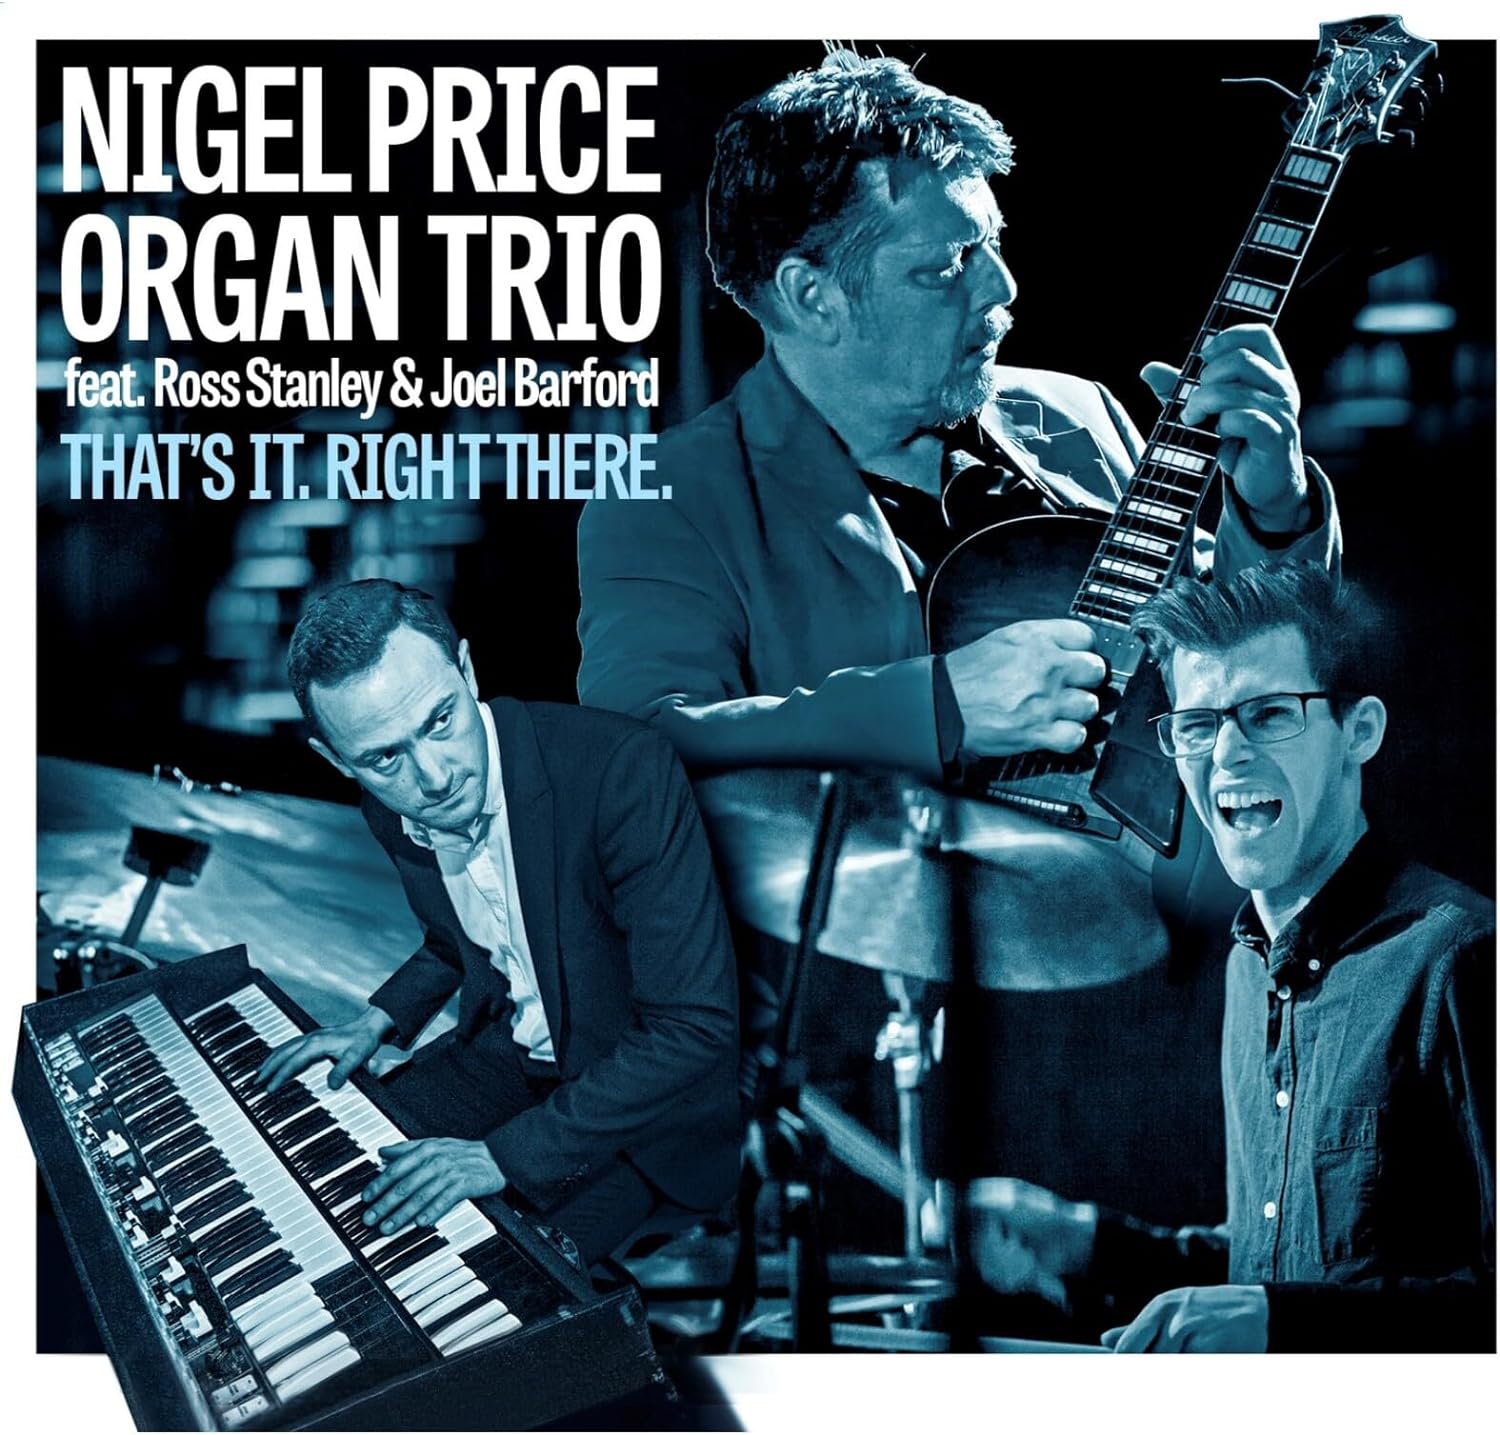 NIGEL PRICE - Nigel Price Organ Trio : Thats it. Right There. cover 